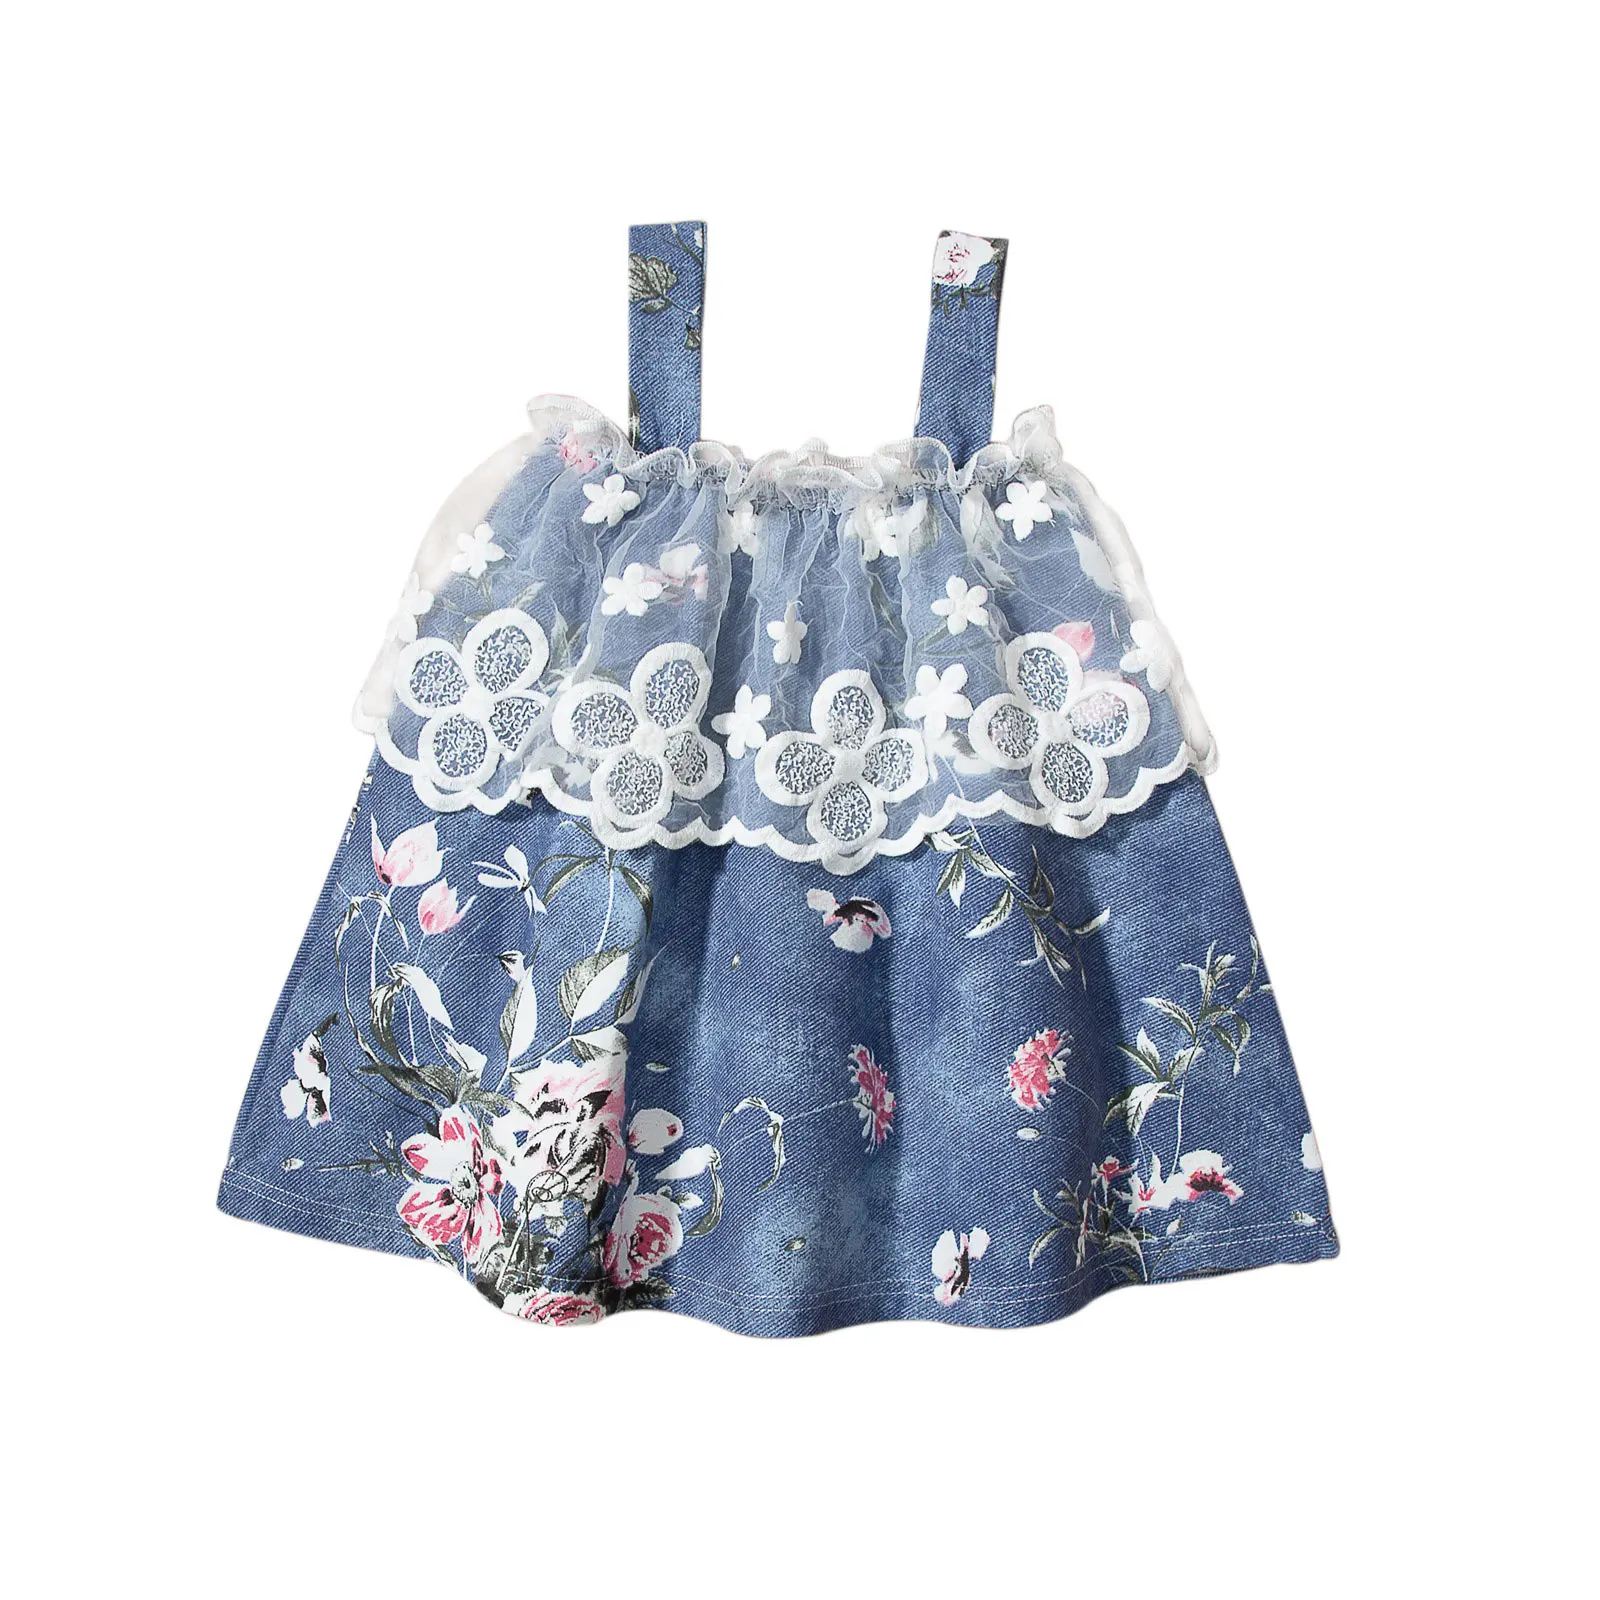 2021-04-20 Lioraitiin 0-24M Infant Baby Girl Fashion Cute Dress Patchwork Lace Floral Printed Demin Clothing